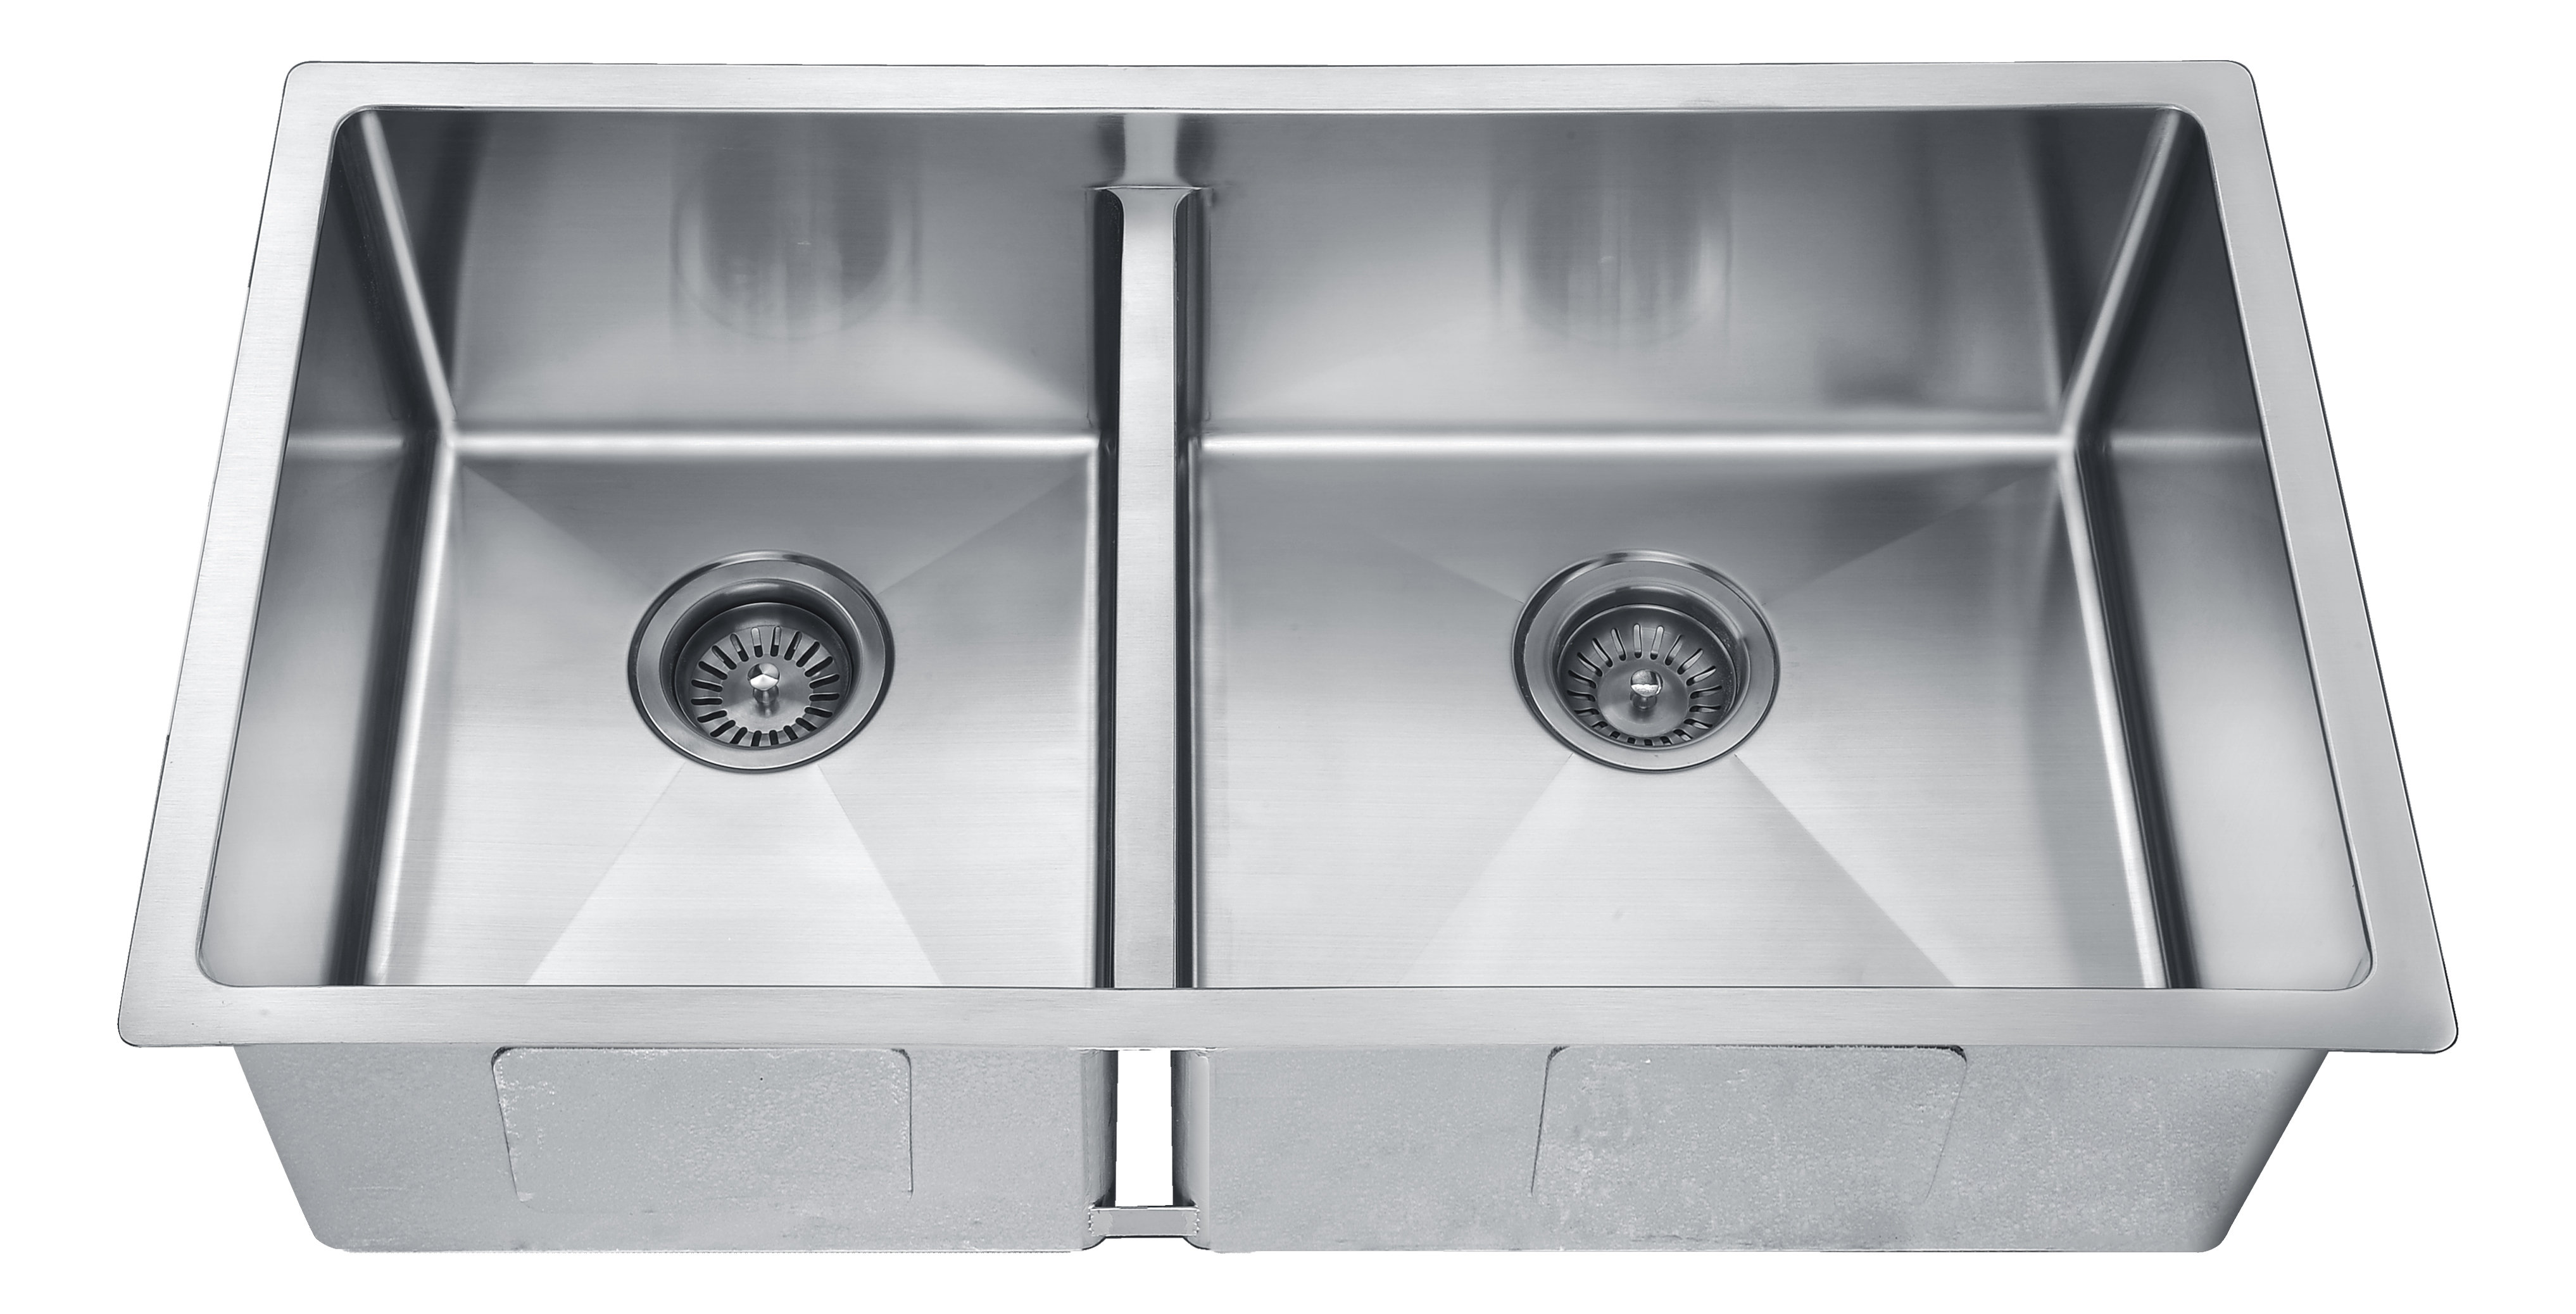 Serene Valley Stainless Steel 36 in. Double Bowl Drop-In or Undermount Kitchen Sink with Thin Divider, Silver